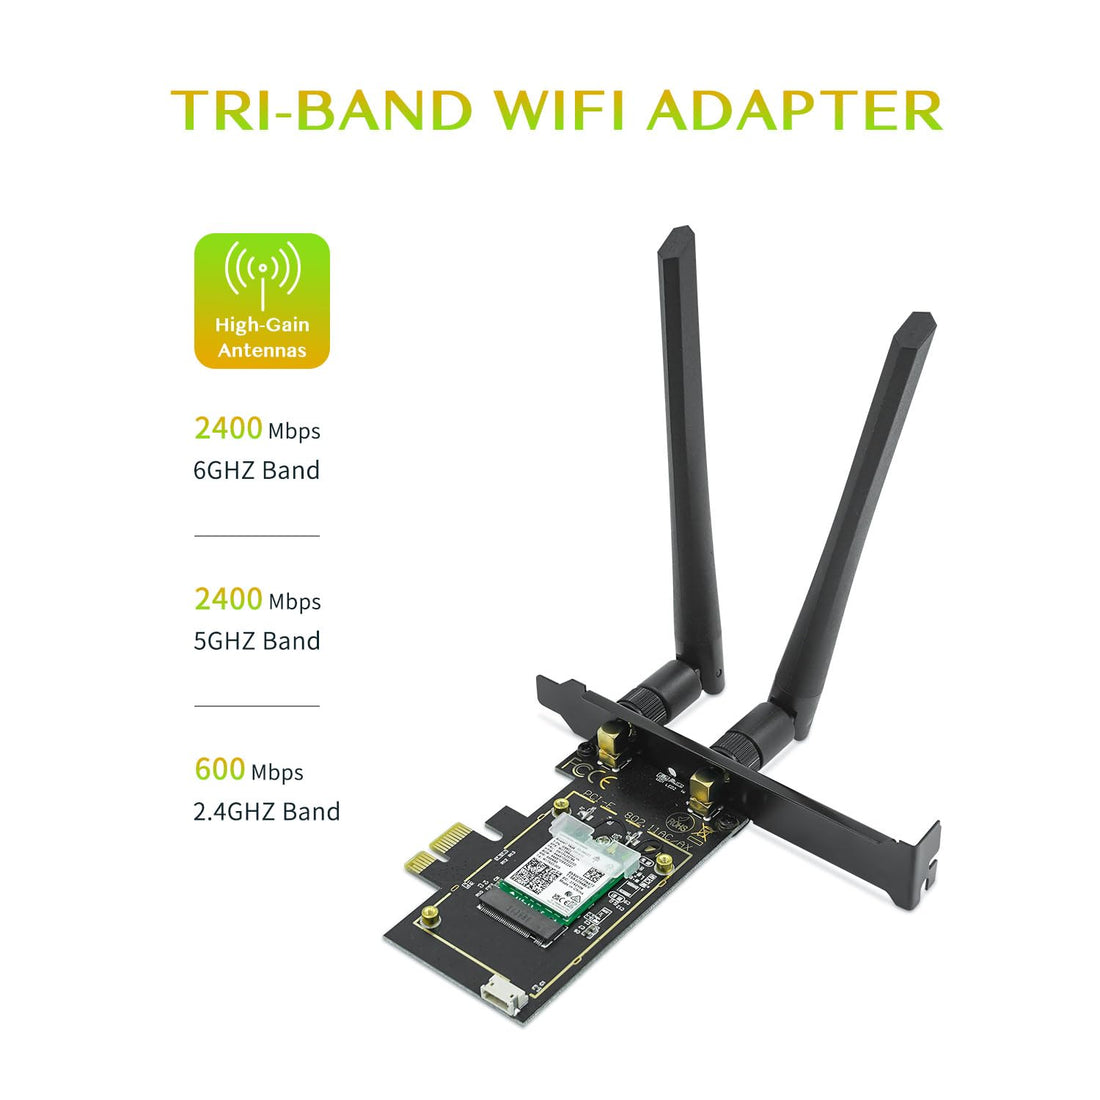 QFly PCIe WiFi 6E Card BT 5.3,Intel AX210 Chipset,Wireless WiFi Card Up to 5400Mbps(6GHz/5GHz/2.4GHz), Tri-Band WiFi Adapter mit OFDMA, Ultra-Low Latency, Supports Windows 11, 10 (64bit)